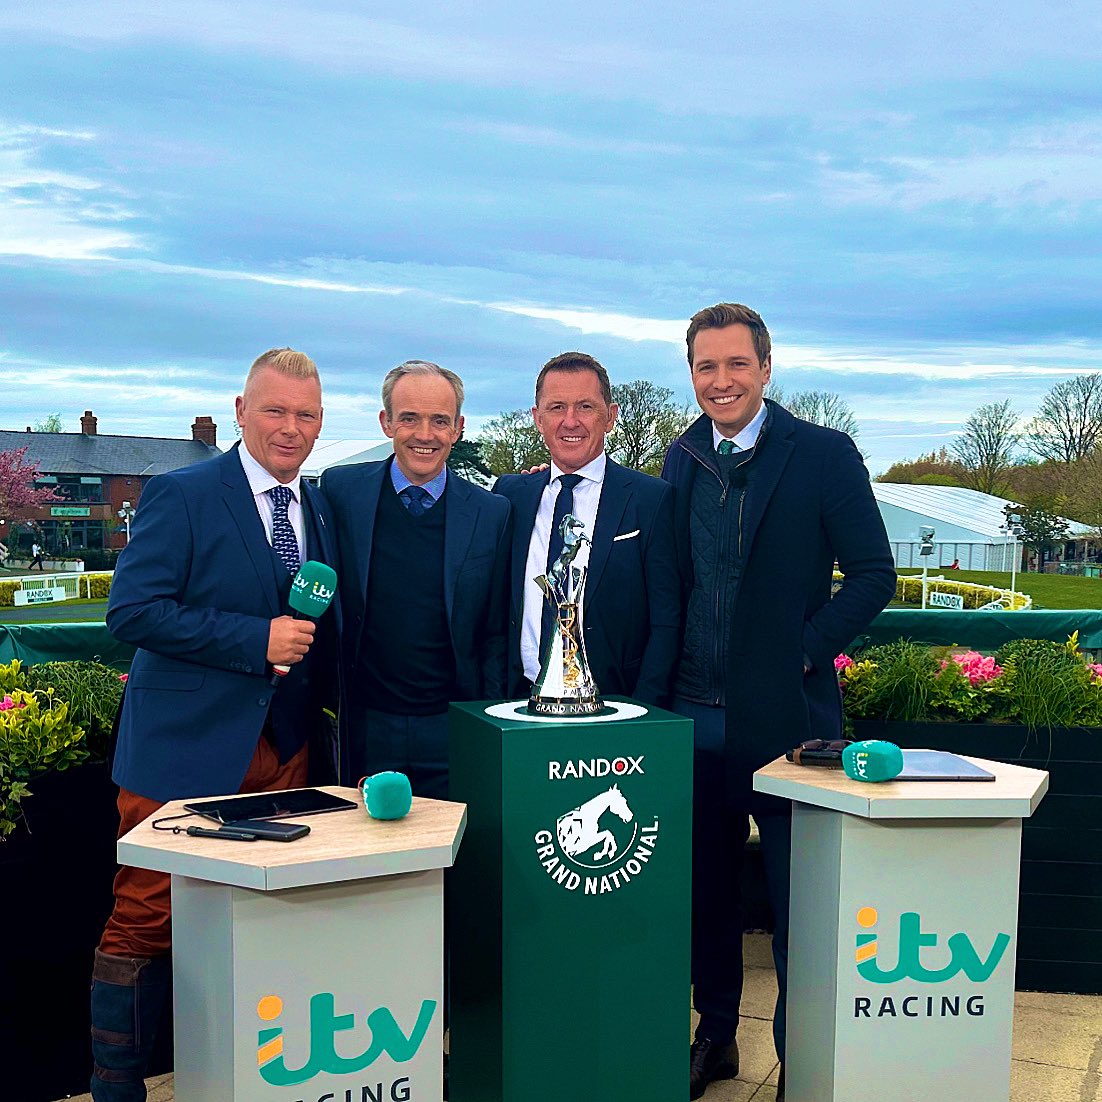 Record figures for The Opening Show on Grand National Day with over half a million people tuning in. Big thanks to all the team who work on the programme @itvracing 👏👏